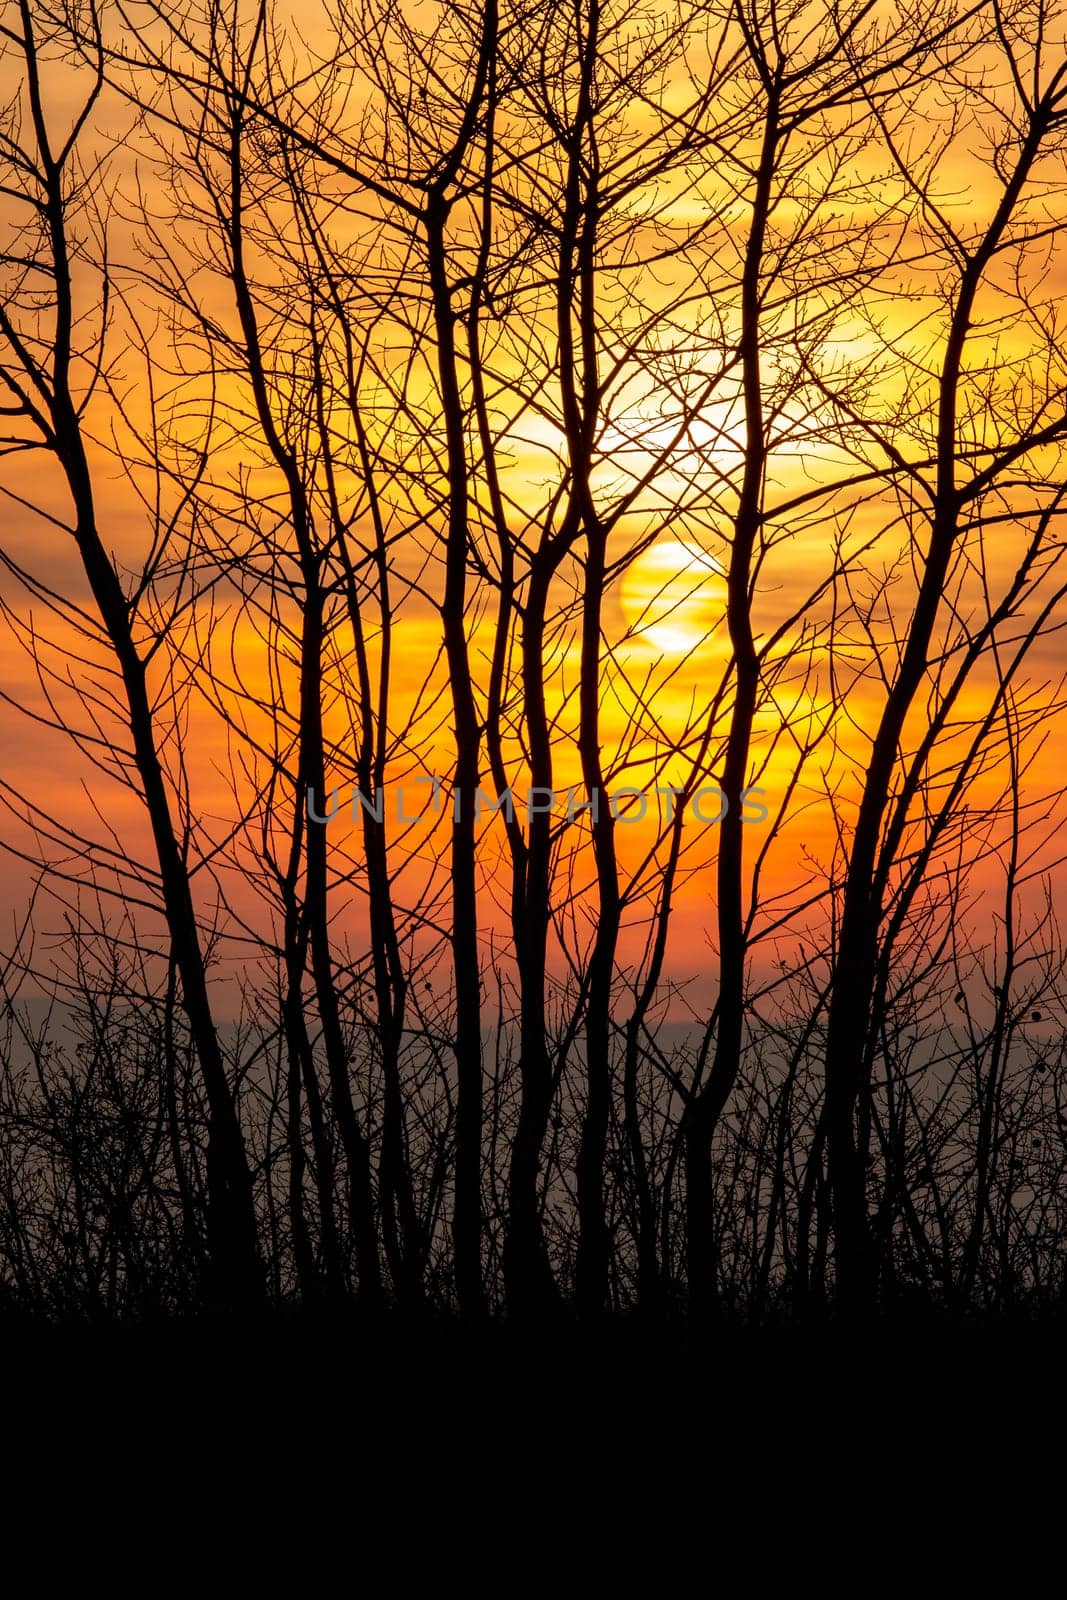 Beautiful sunset landscape with trees. by Digoarpi